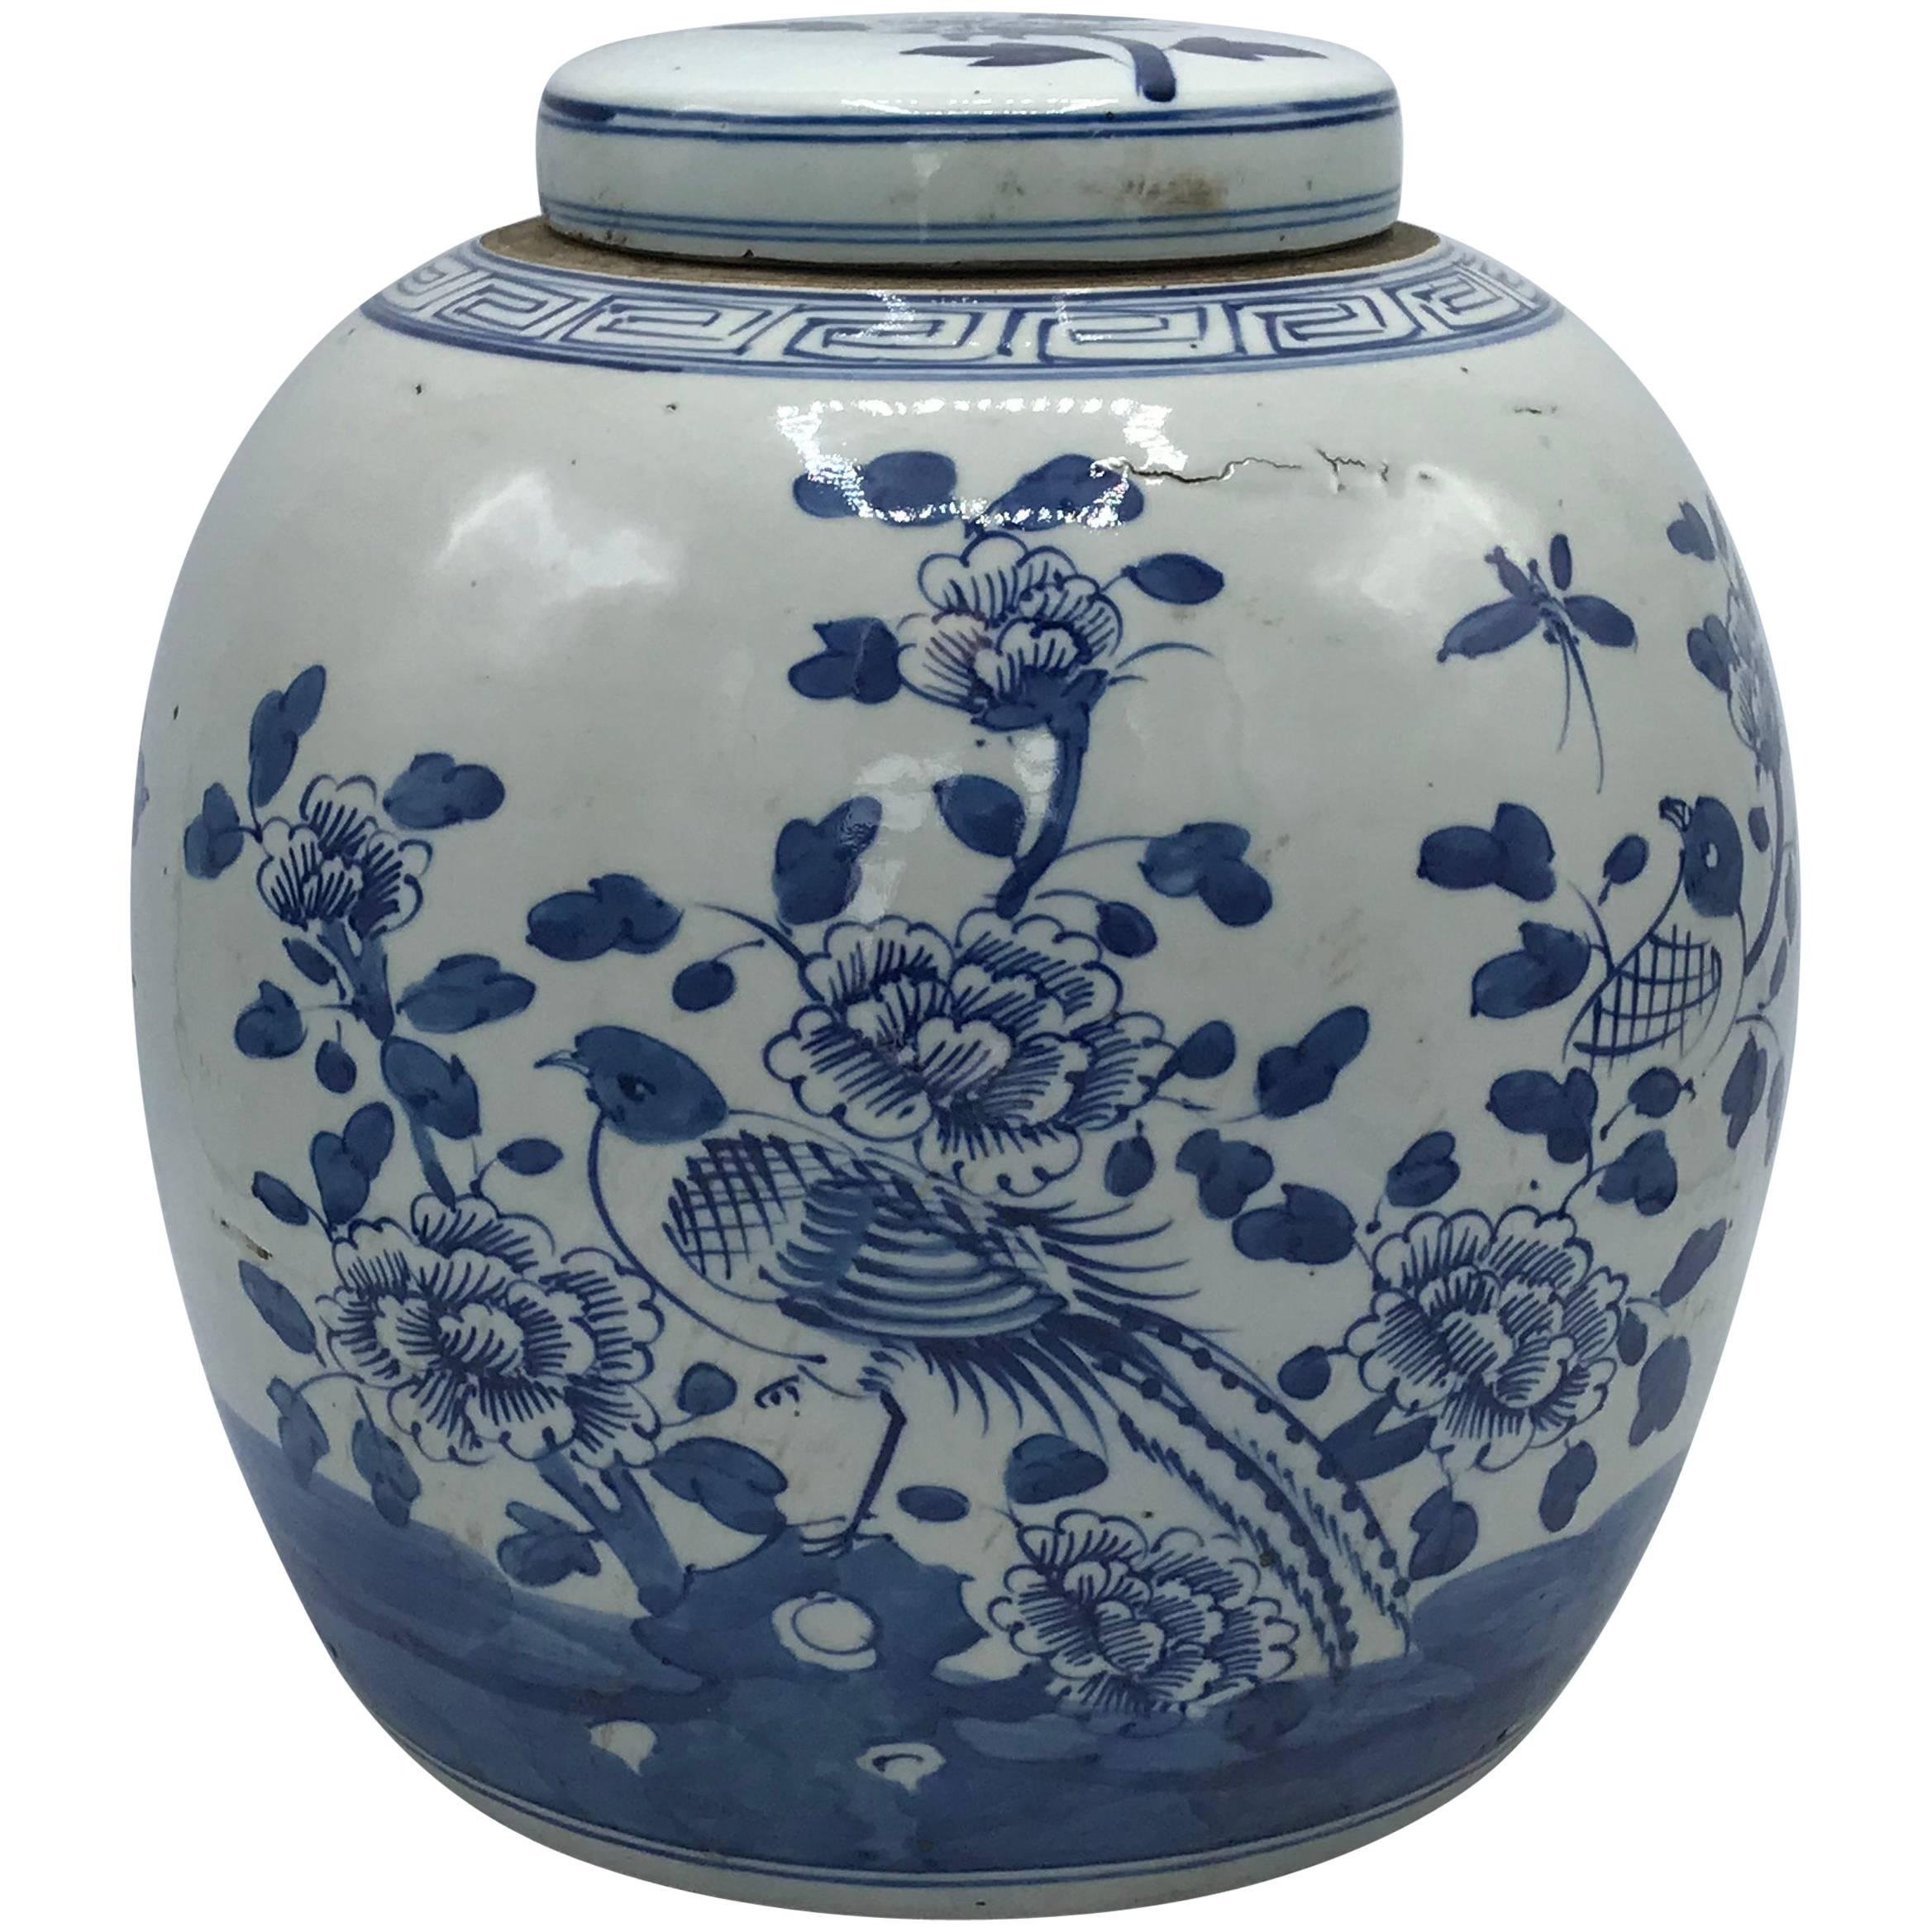 19th Century Blue and White Ginger Jar with Bird and Floral Motif